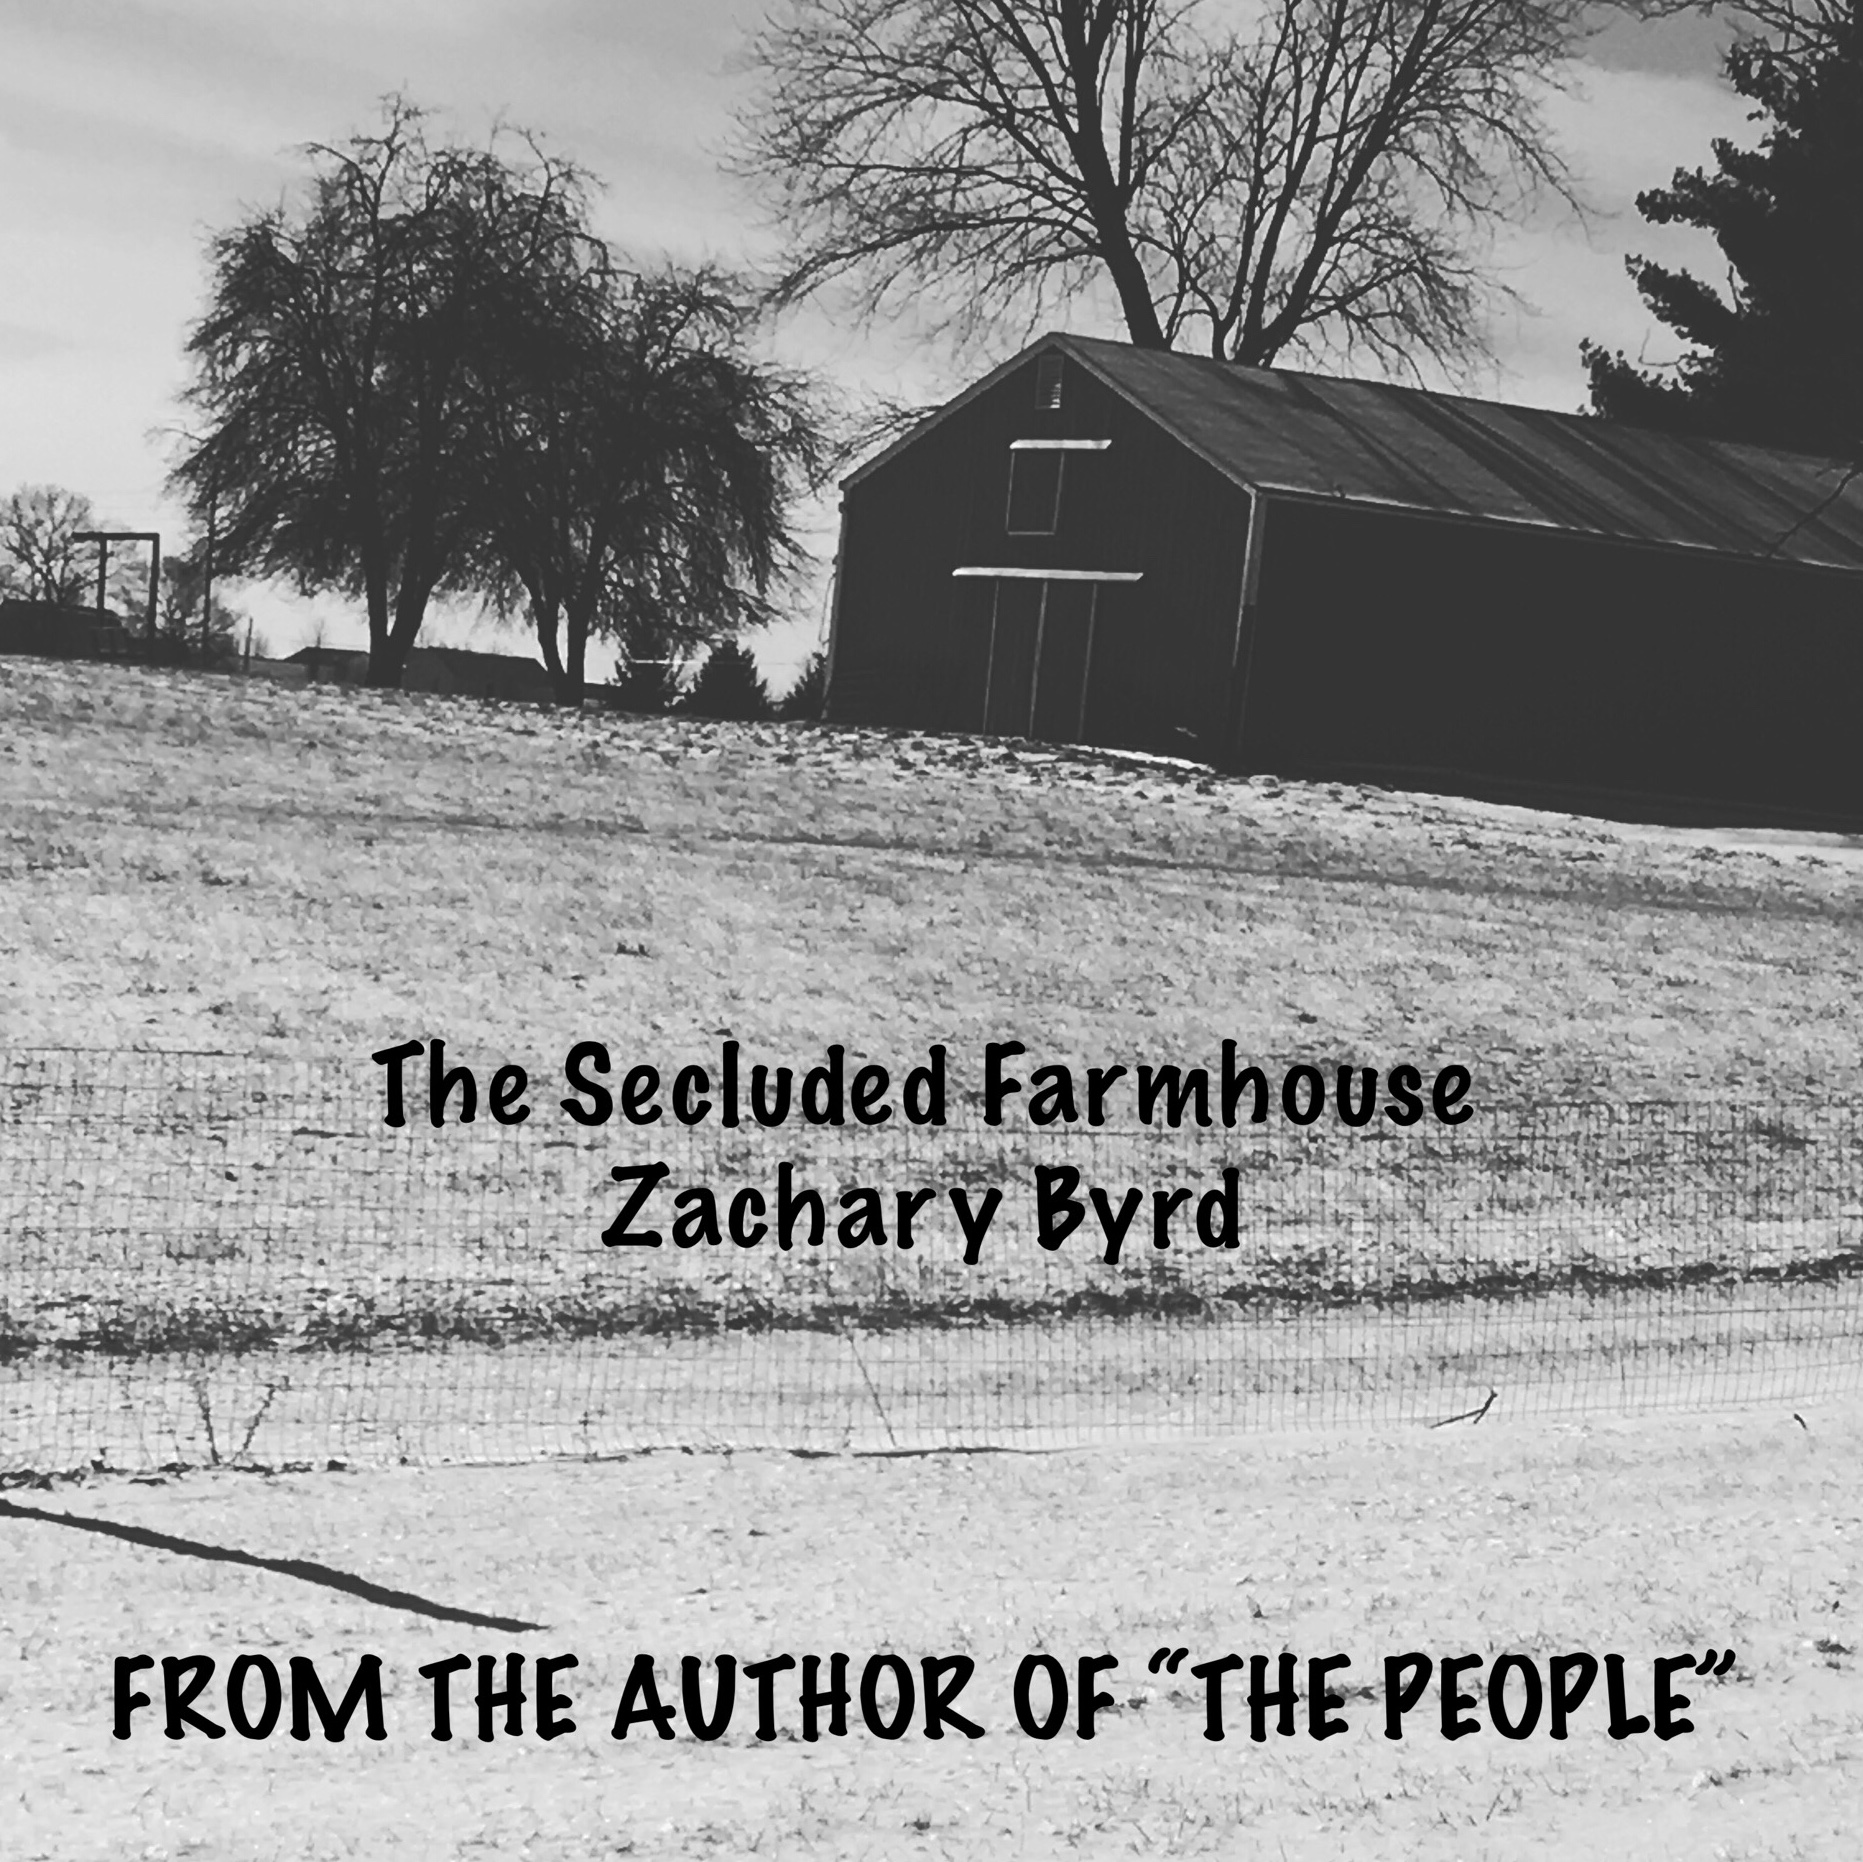 FREE: The Secluded Farmhouse by Zachary Byrd